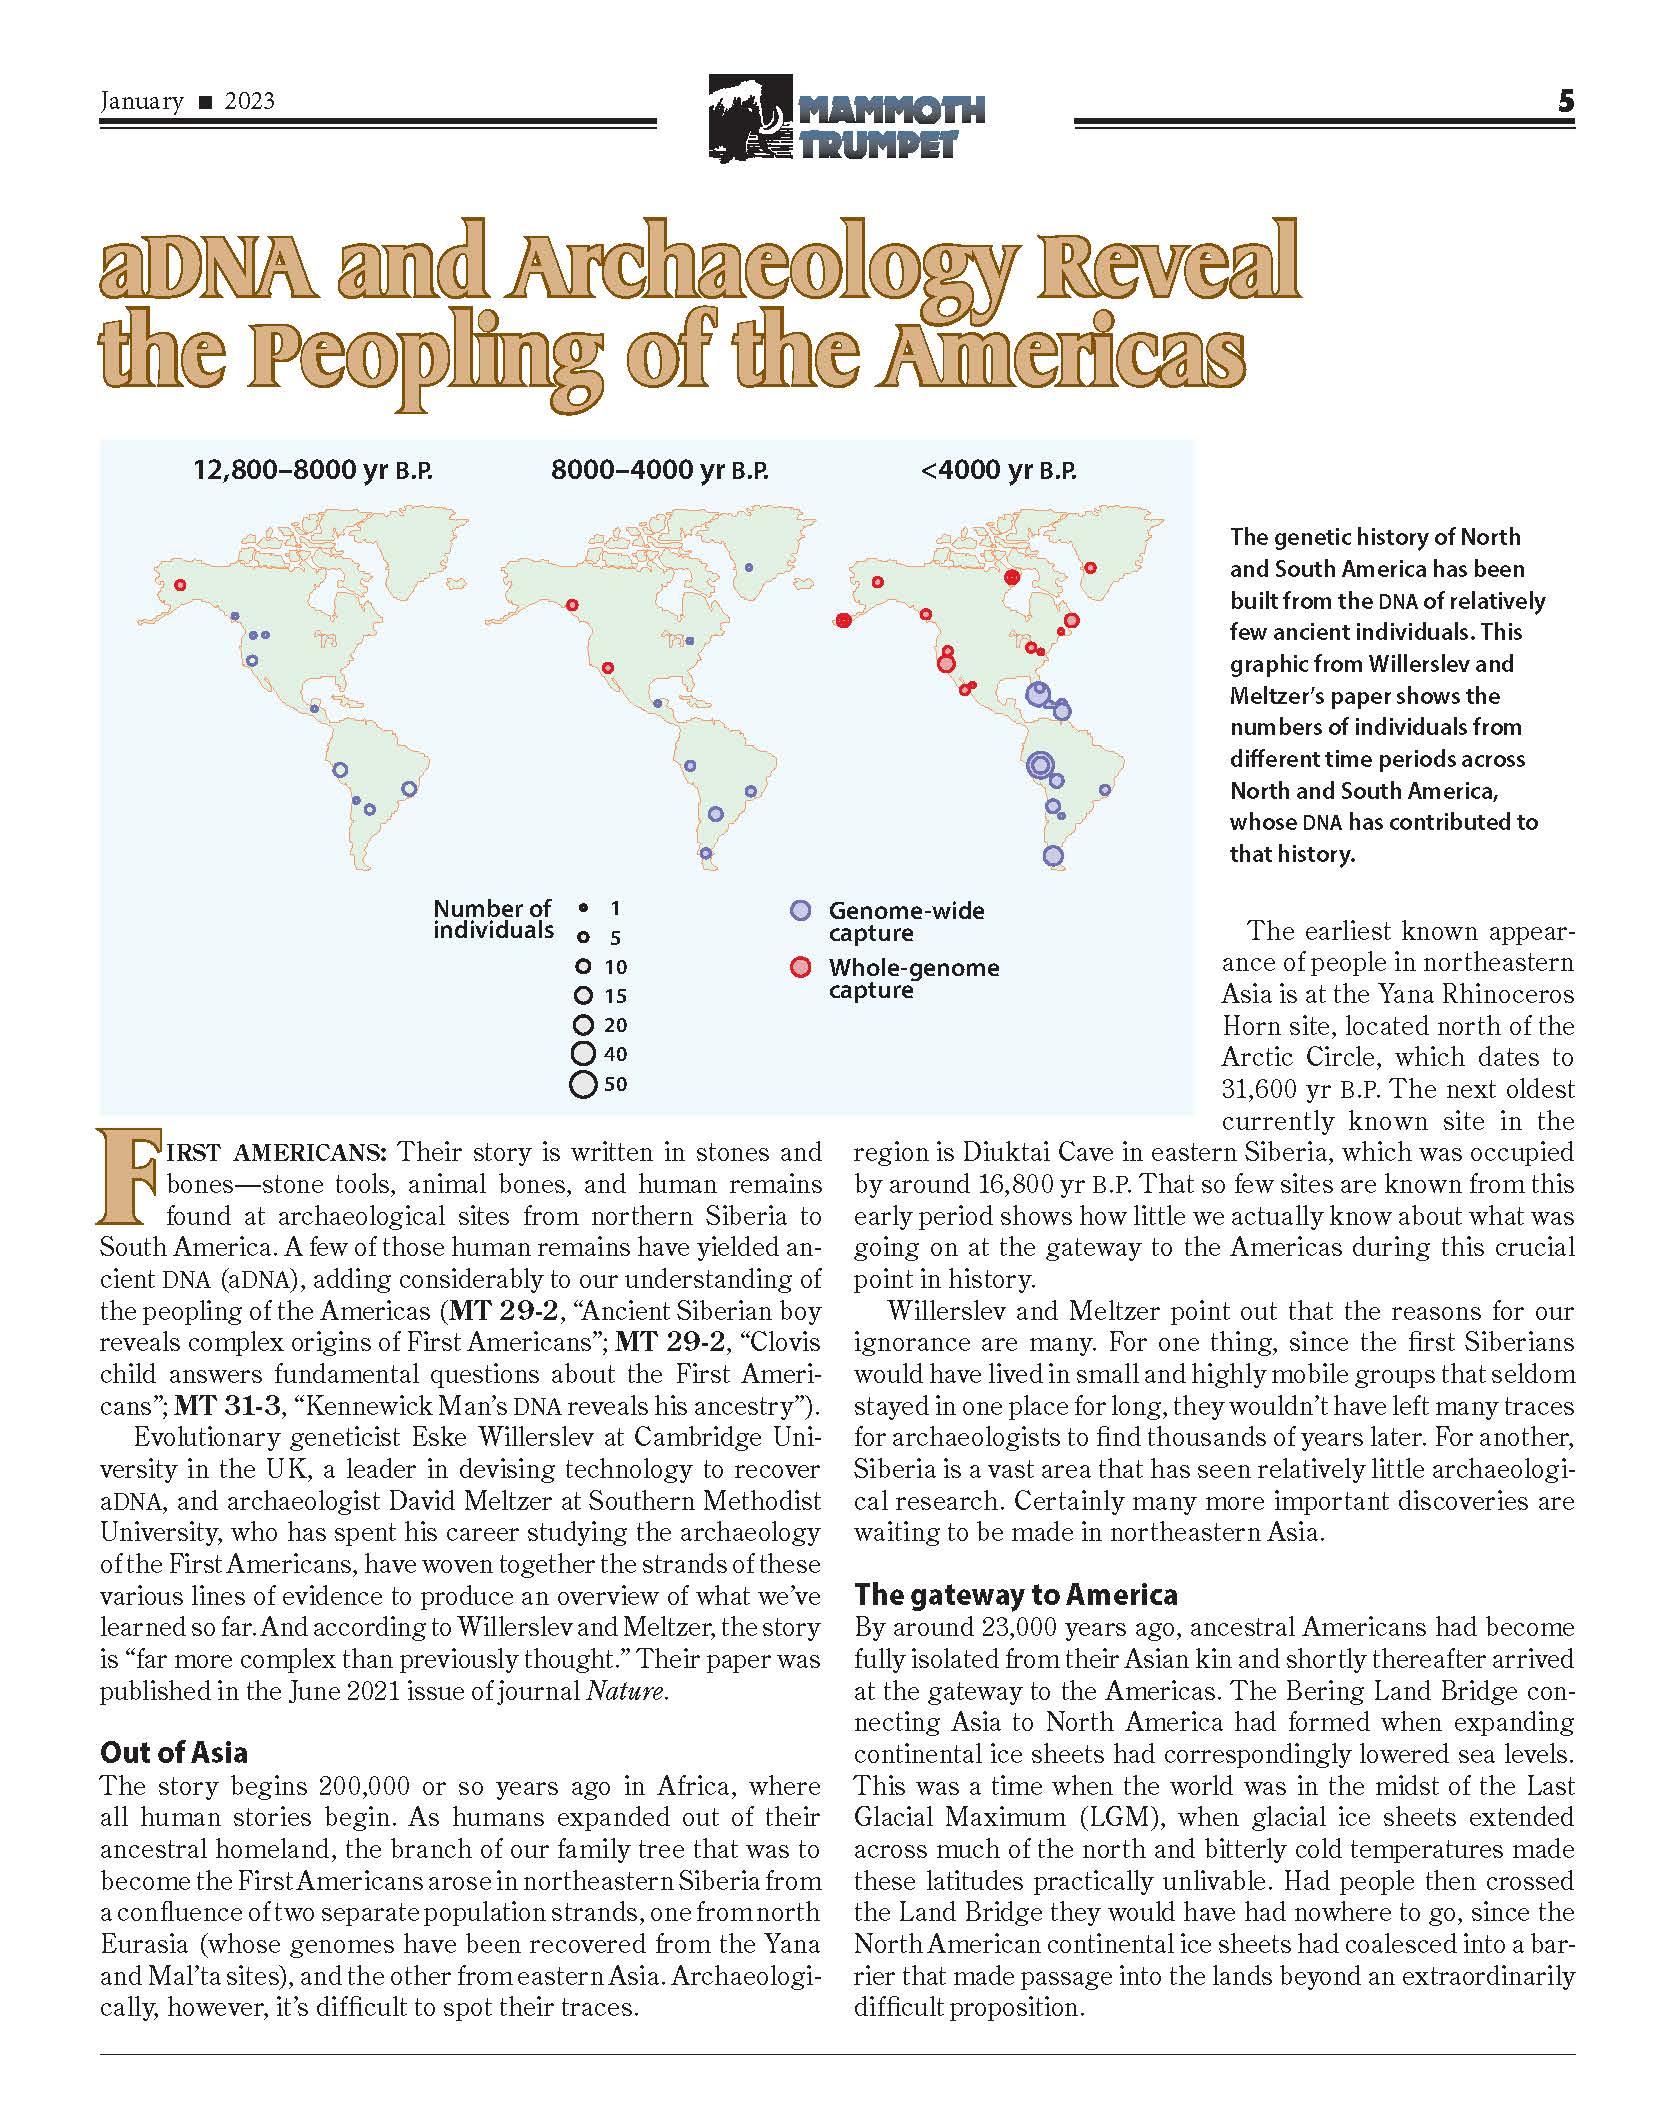 January mammoth trumpet page 5. DNA and archaeology reveal the peopling of the Americas.